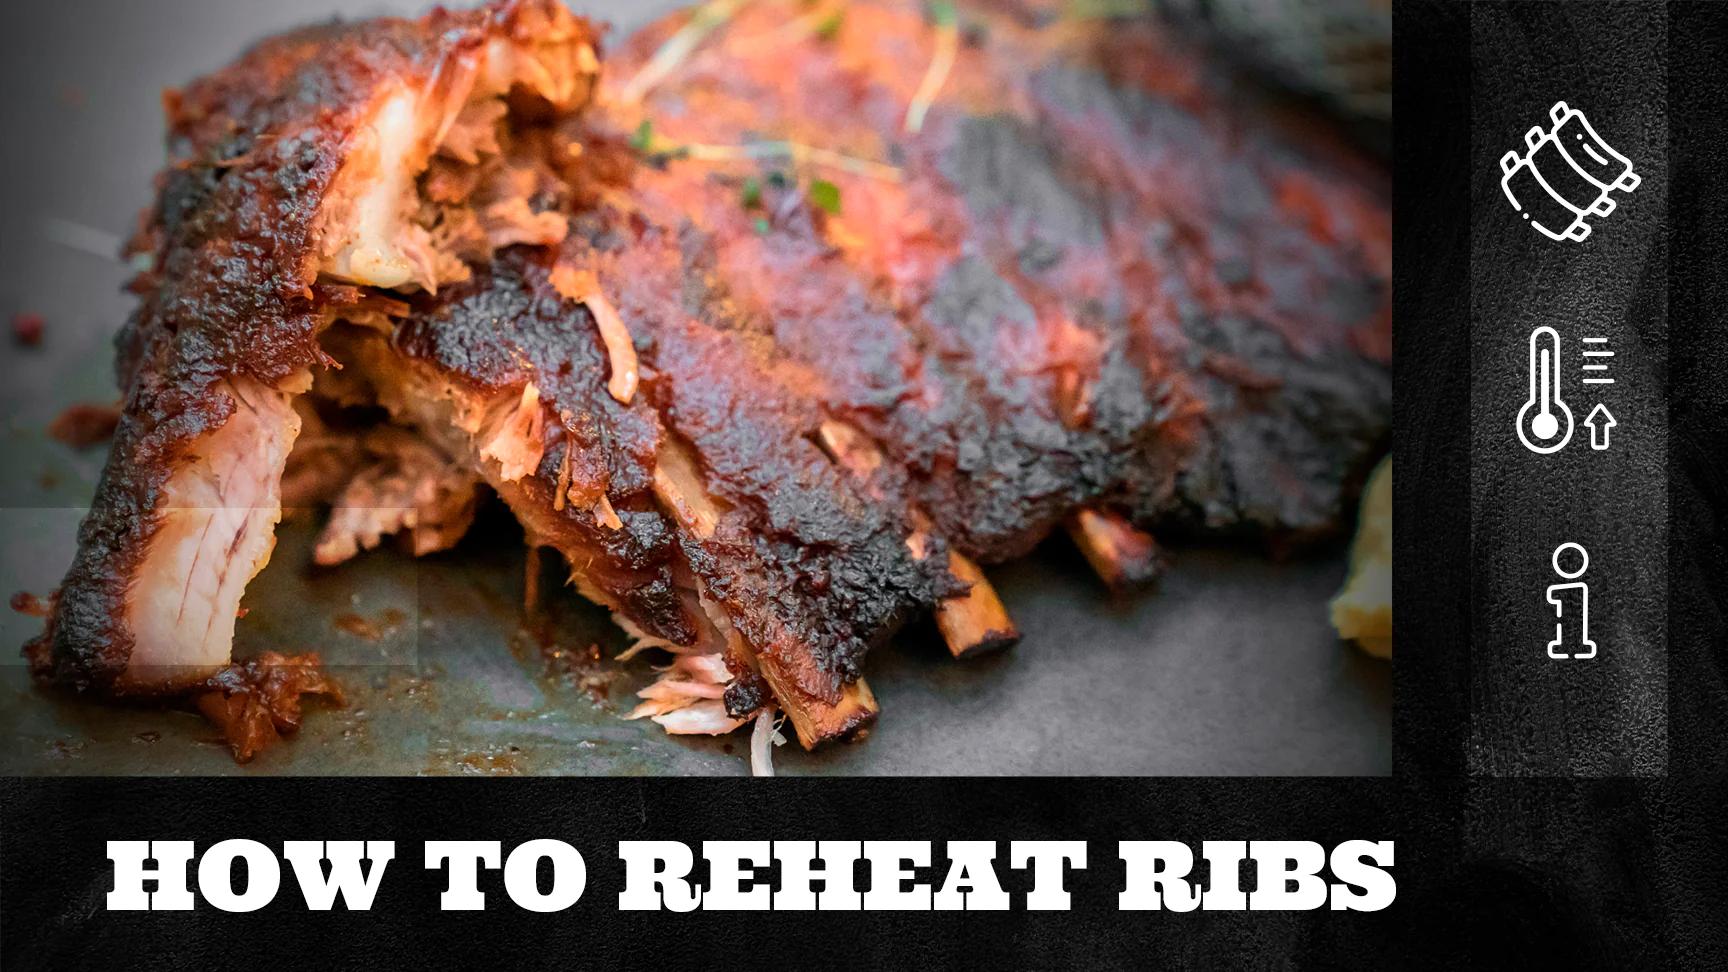 how to keep smoked ribs warm - Can you smoke ribs and finish cooking later